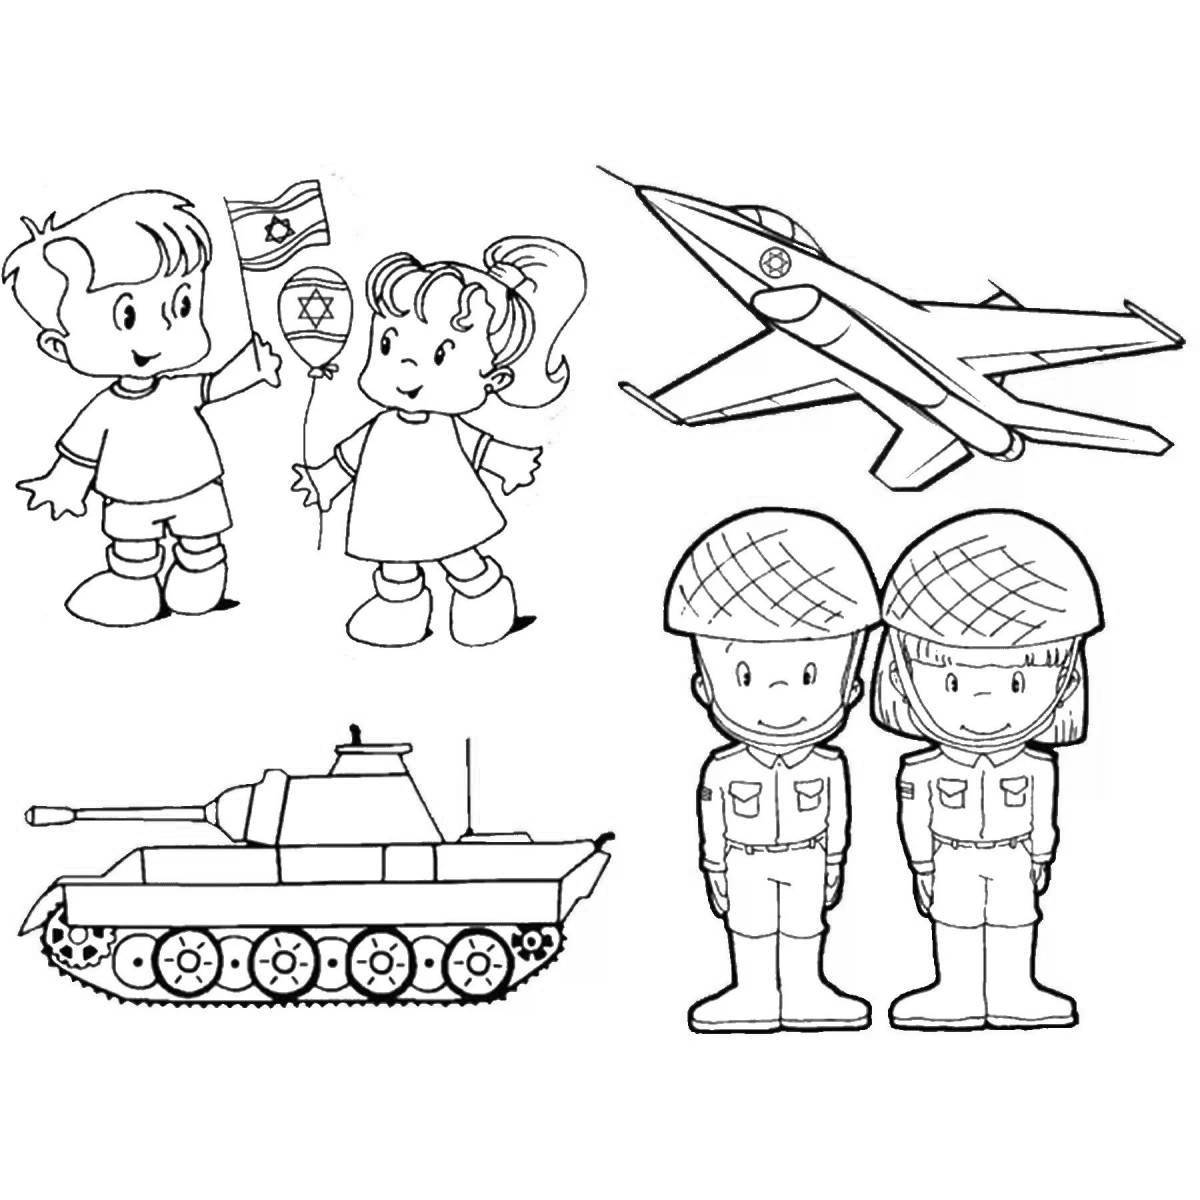 Grand tanker of the Russian army for children